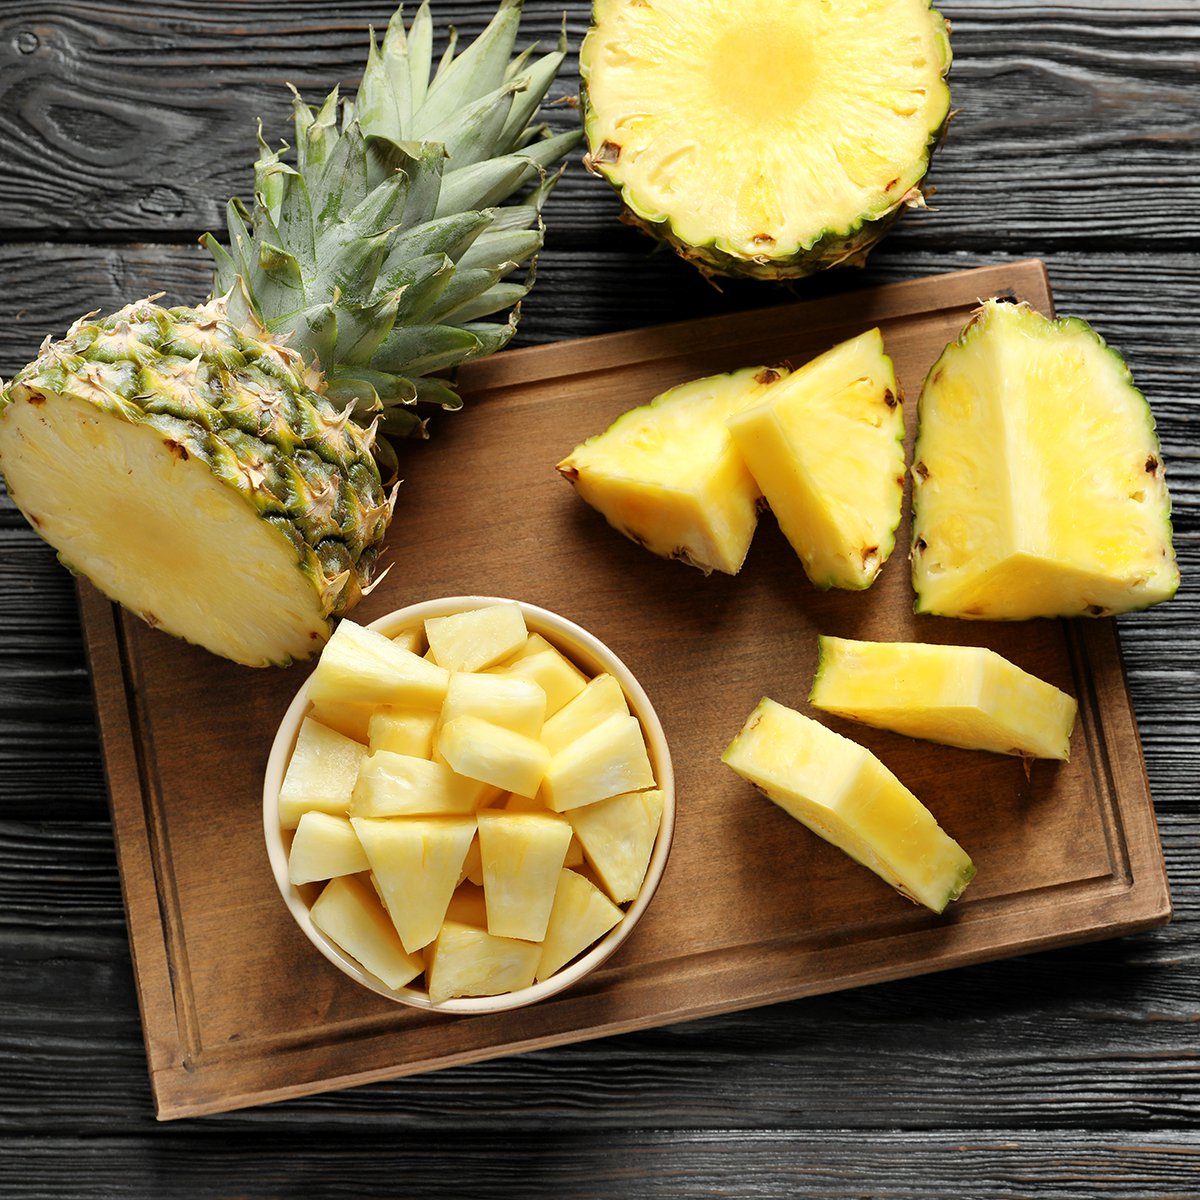 Wooden board with fresh sliced pineapple on table